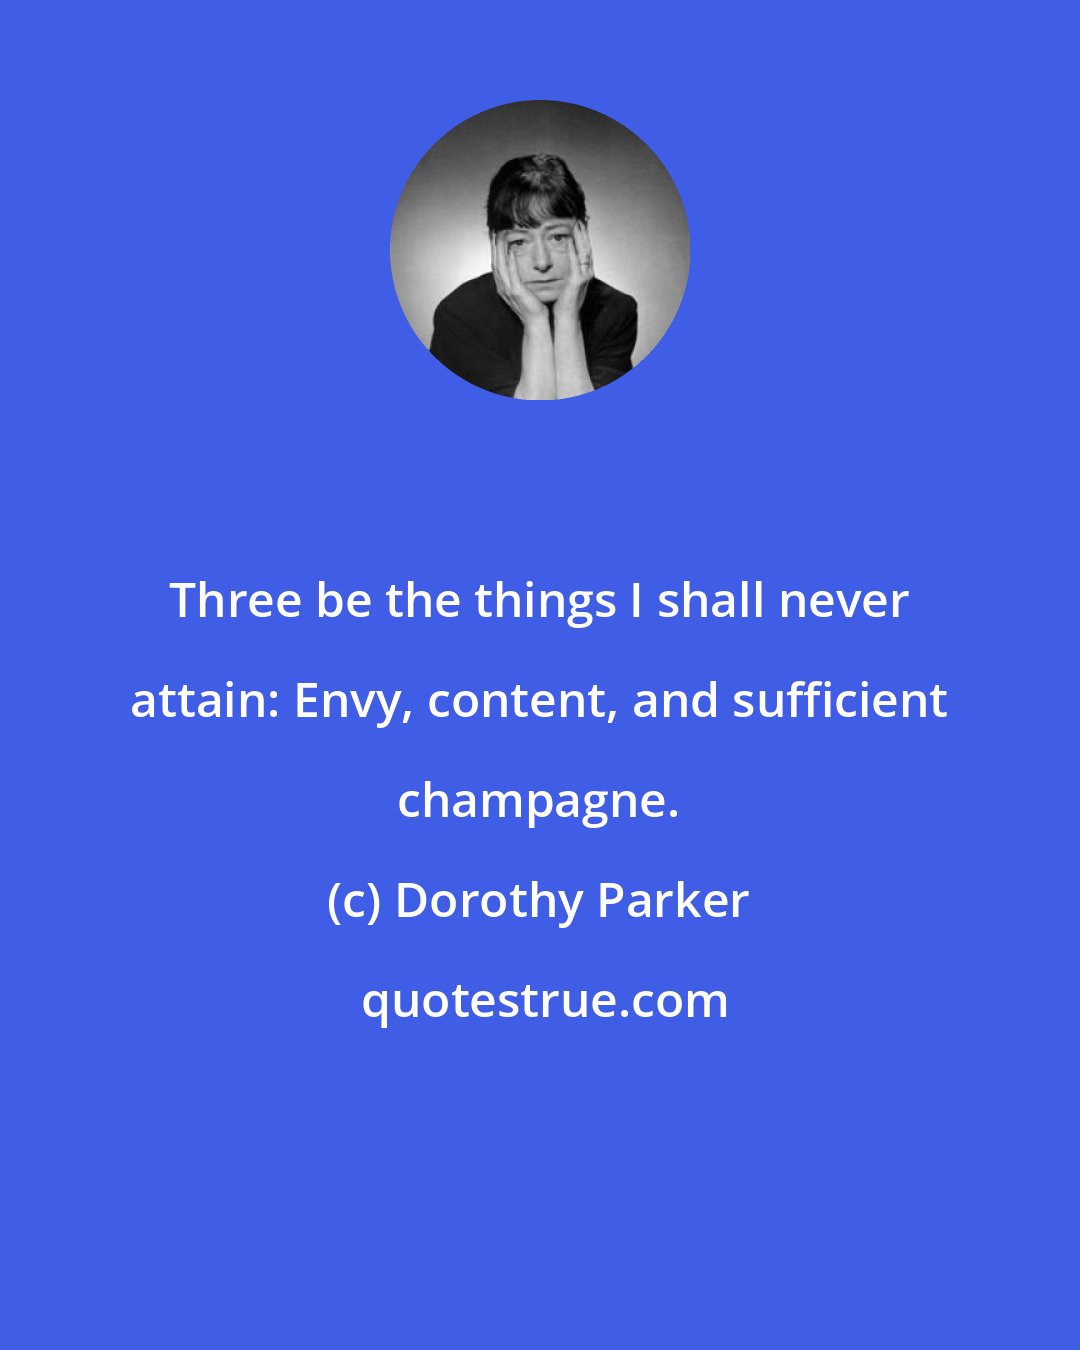 Dorothy Parker: Three be the things I shall never attain: Envy, content, and sufficient champagne.